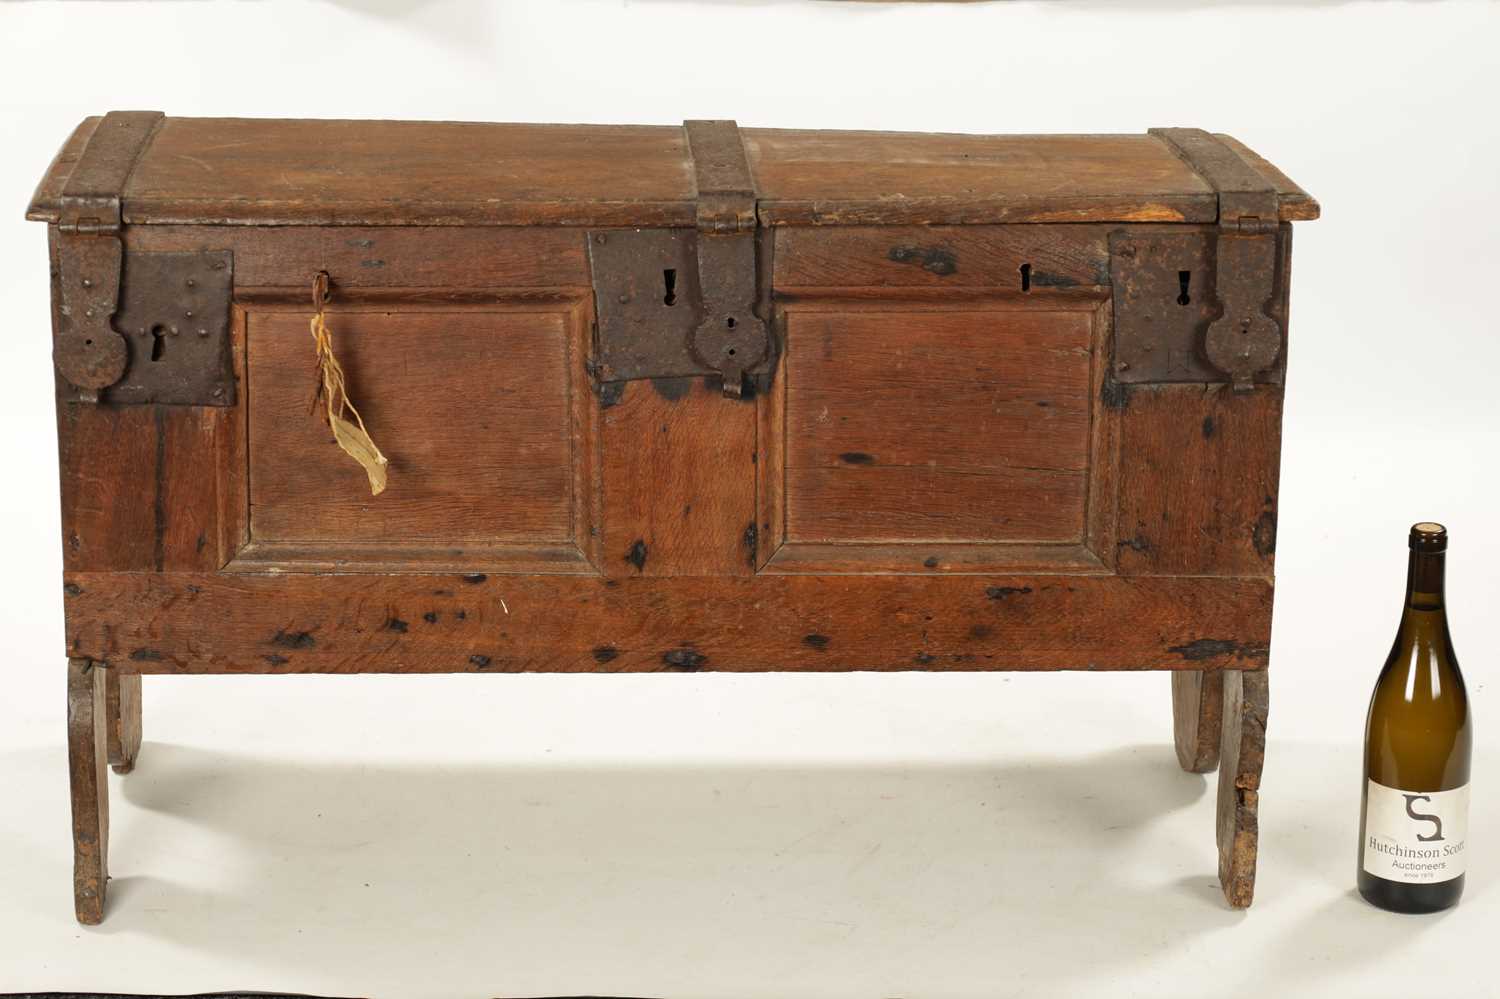 A RARE 16TH / 17TH CENTURY OAK IRON BOUND STRONG BOX/PLANK COFFER - Image 2 of 8